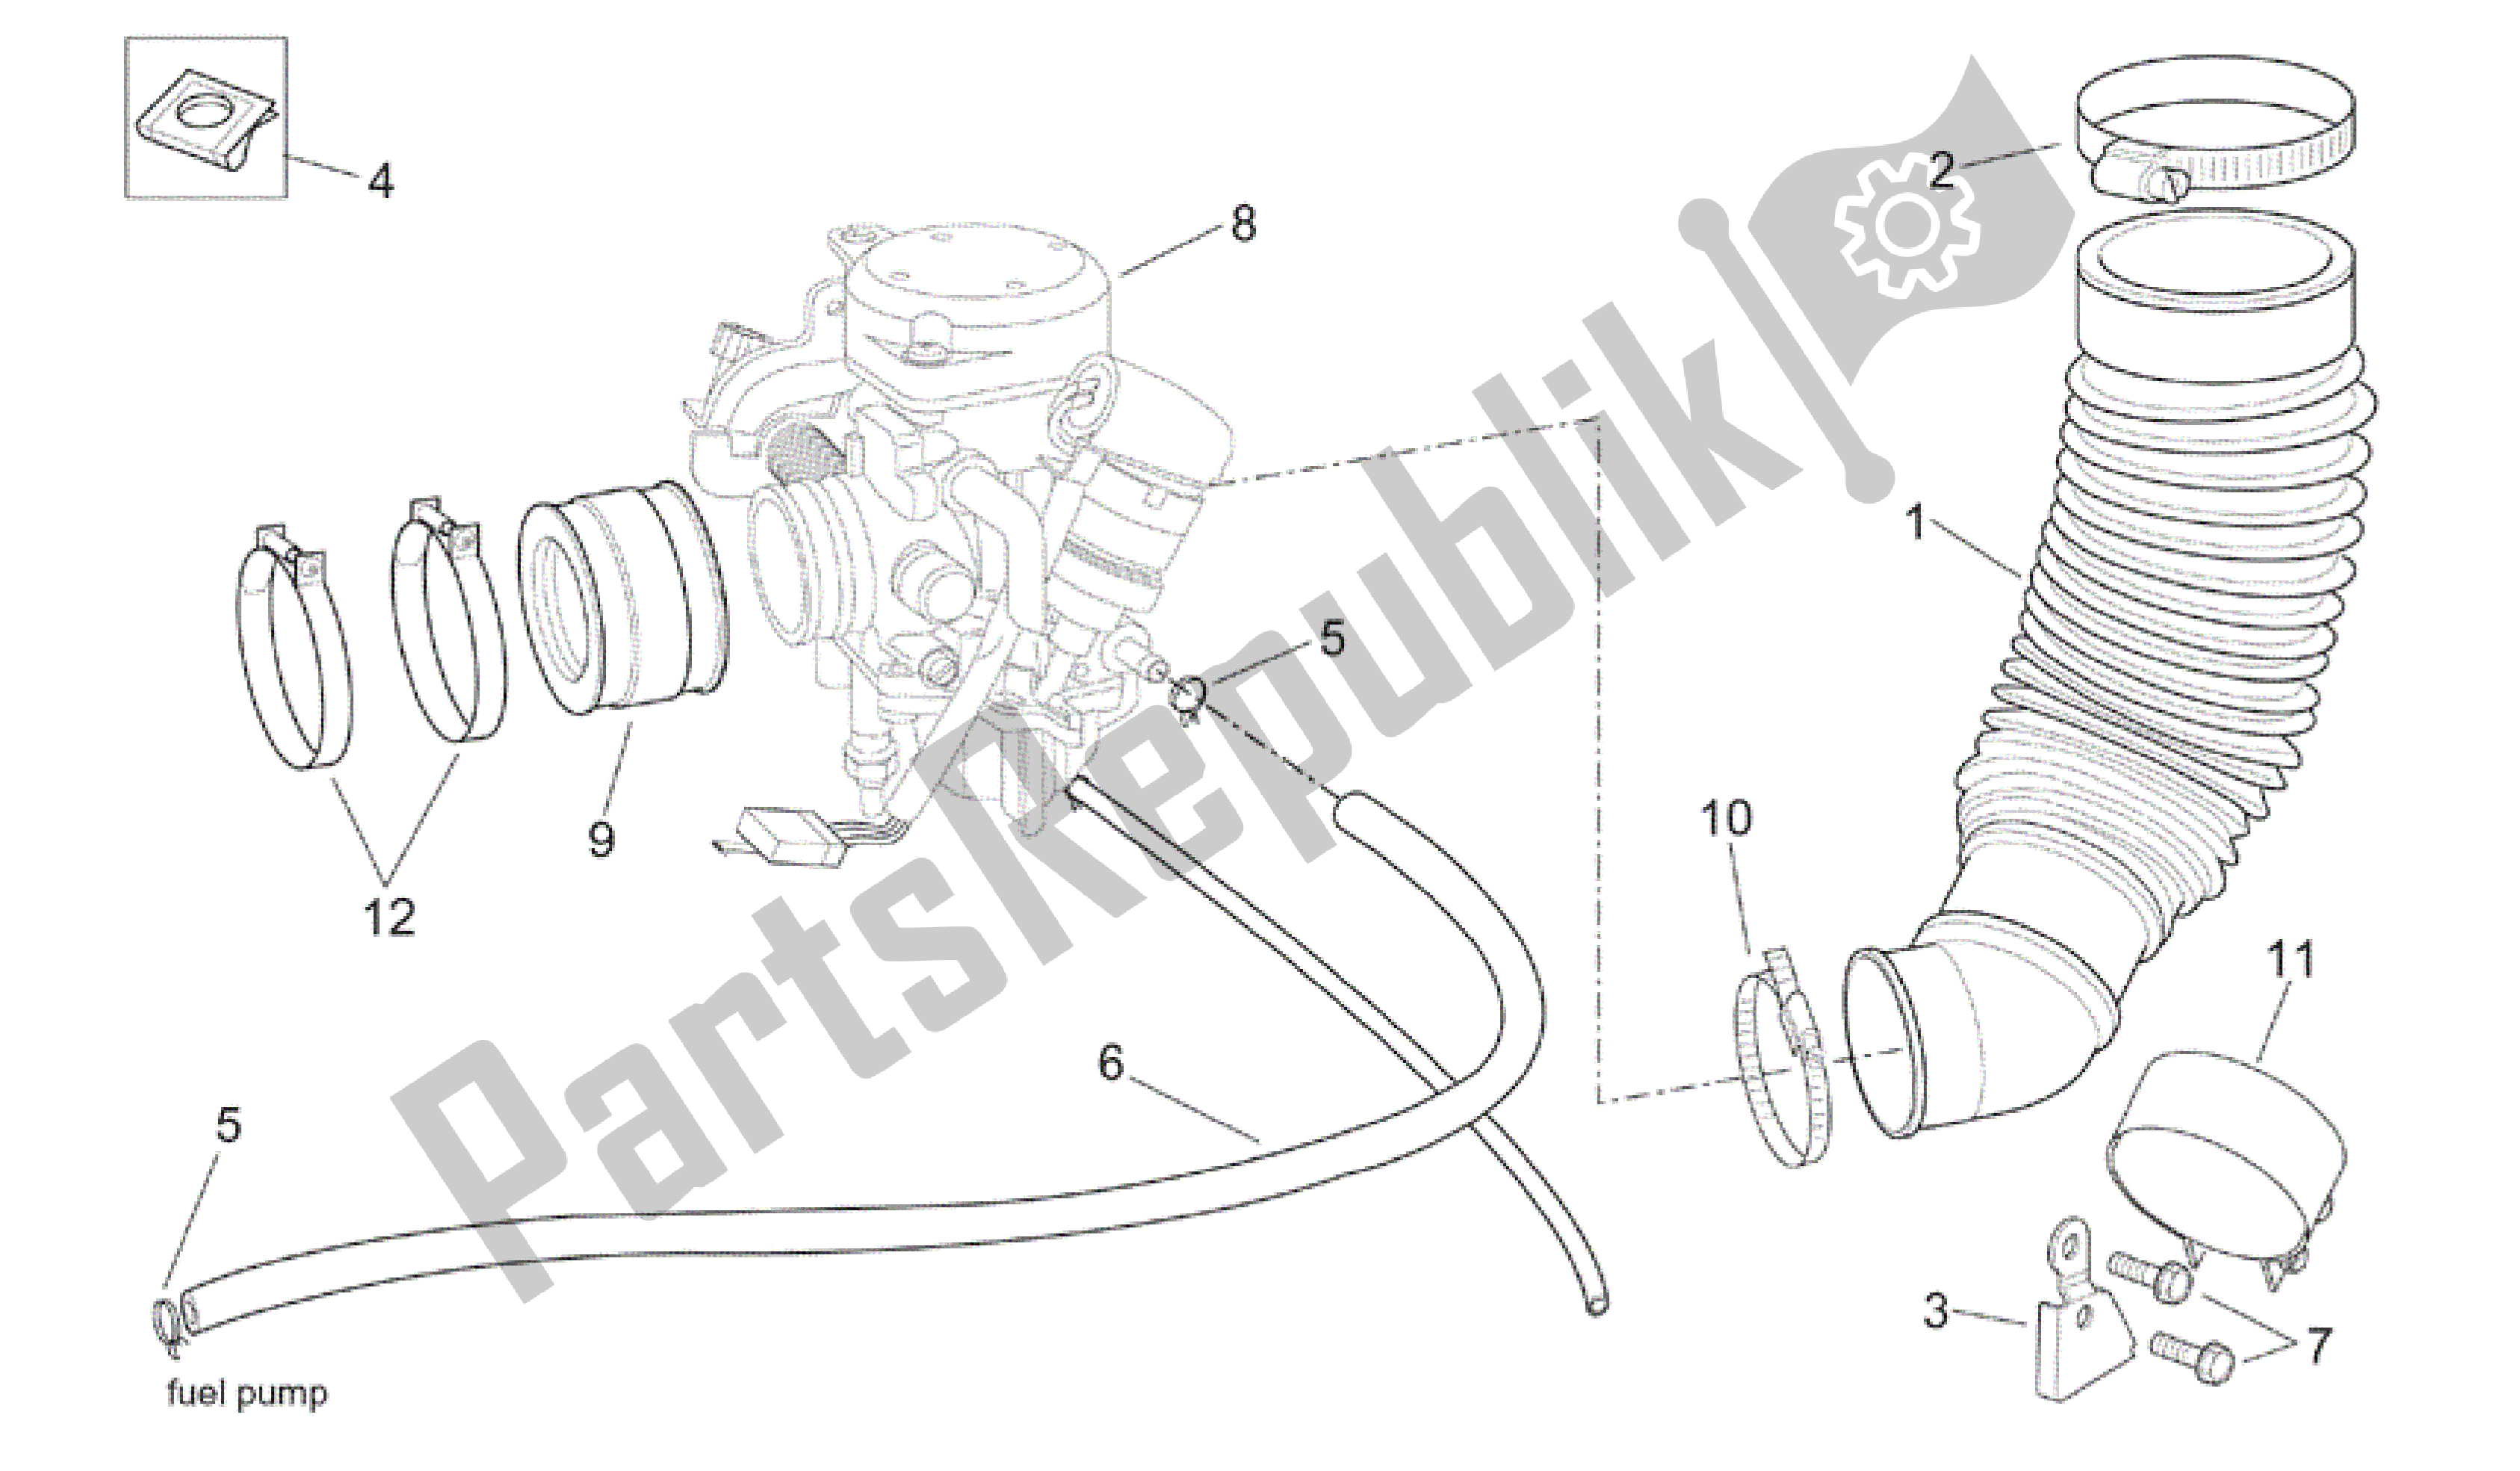 All parts for the Carburettor I of the Aprilia Scarabeo 200 1999 - 2004